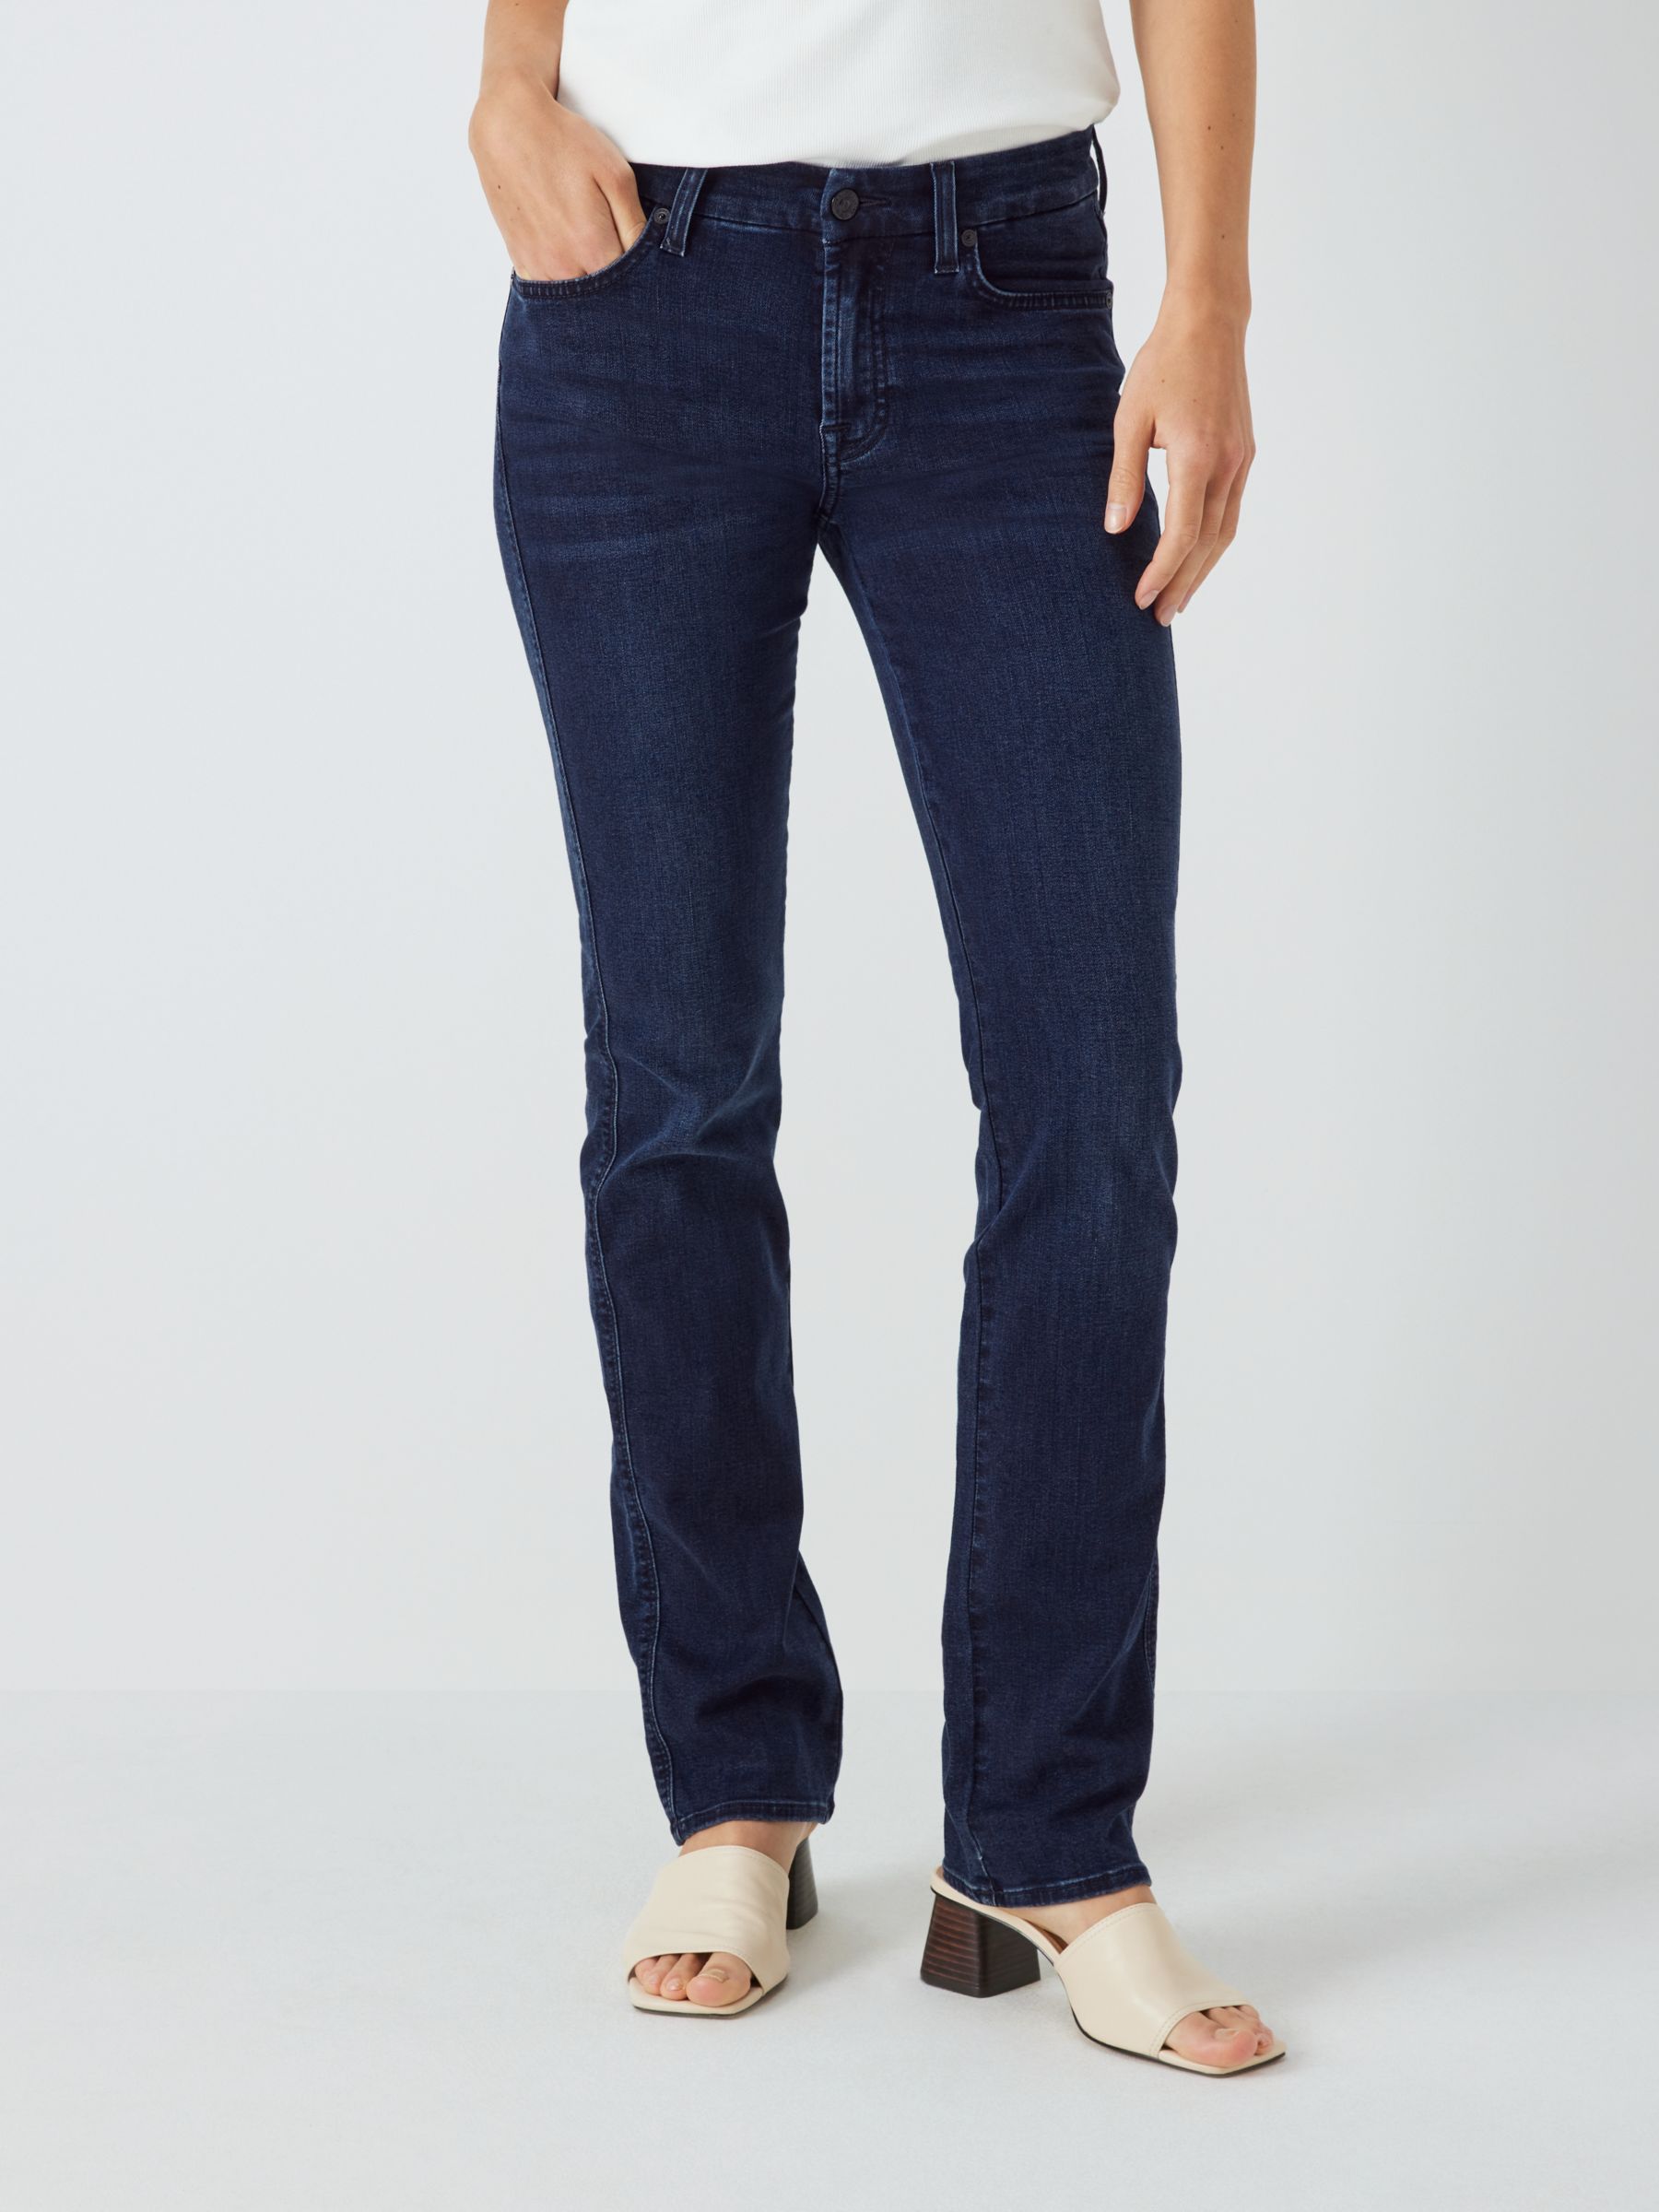 7 For All Mankind Kimmie B(Air) Jeans, Park Avenue, 24